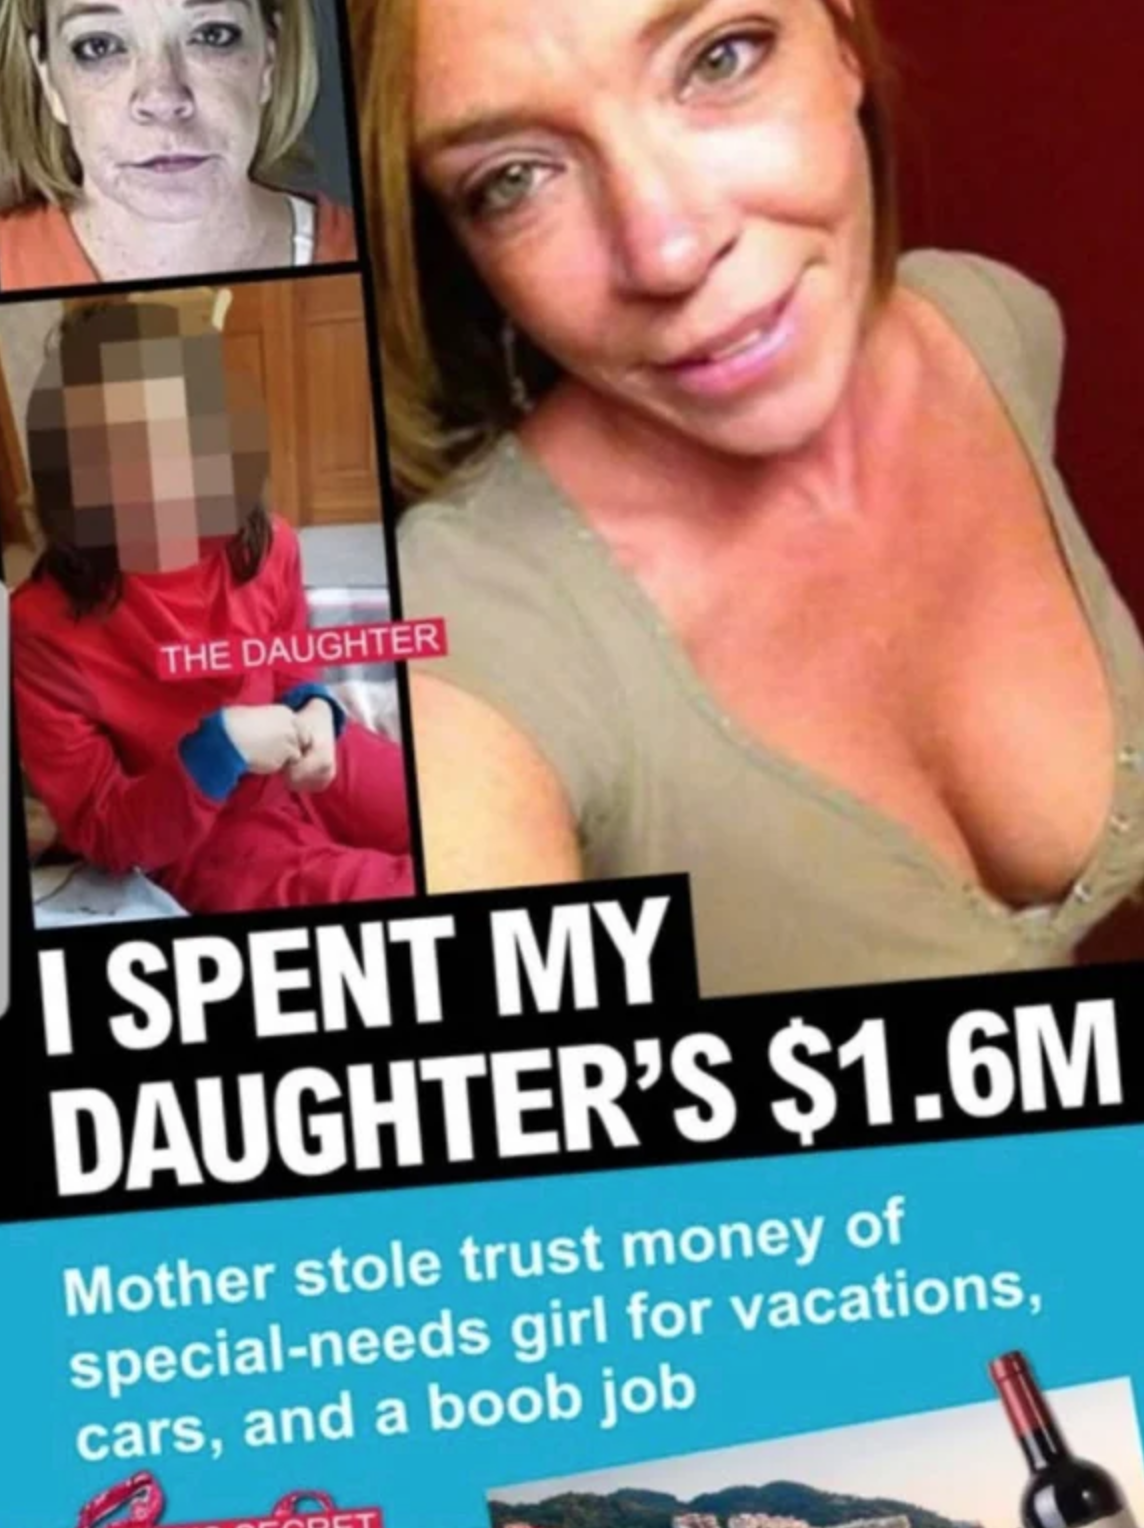 photo caption - The Daughter I Spent My Daughter'S $1.6M Mother stole trust money of specialneeds girl for vacations, cars, and a boob job